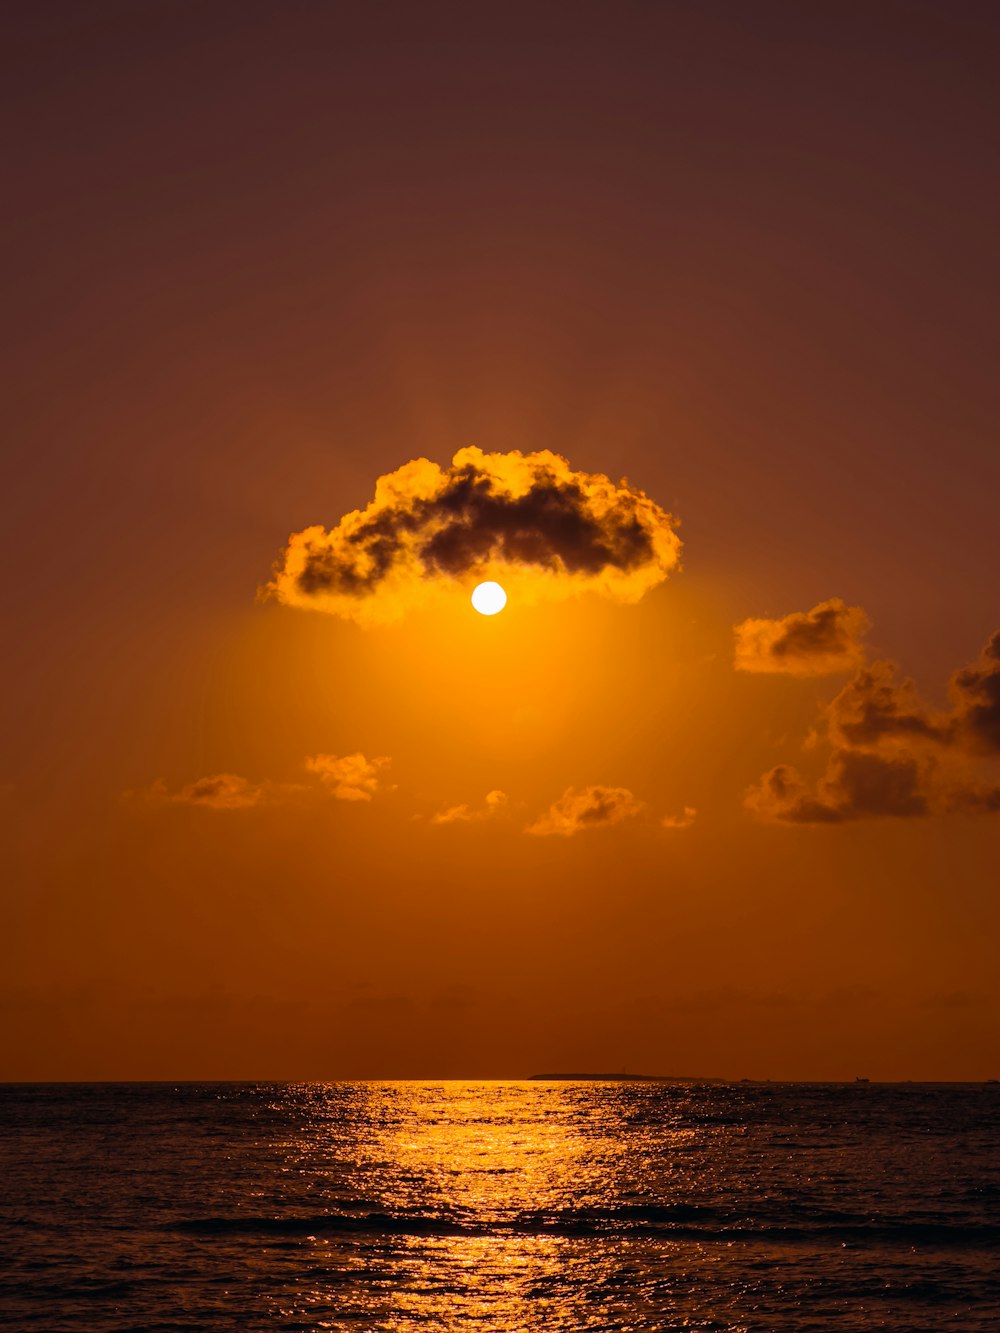 the sun setting over the ocean with a cloud in the sky